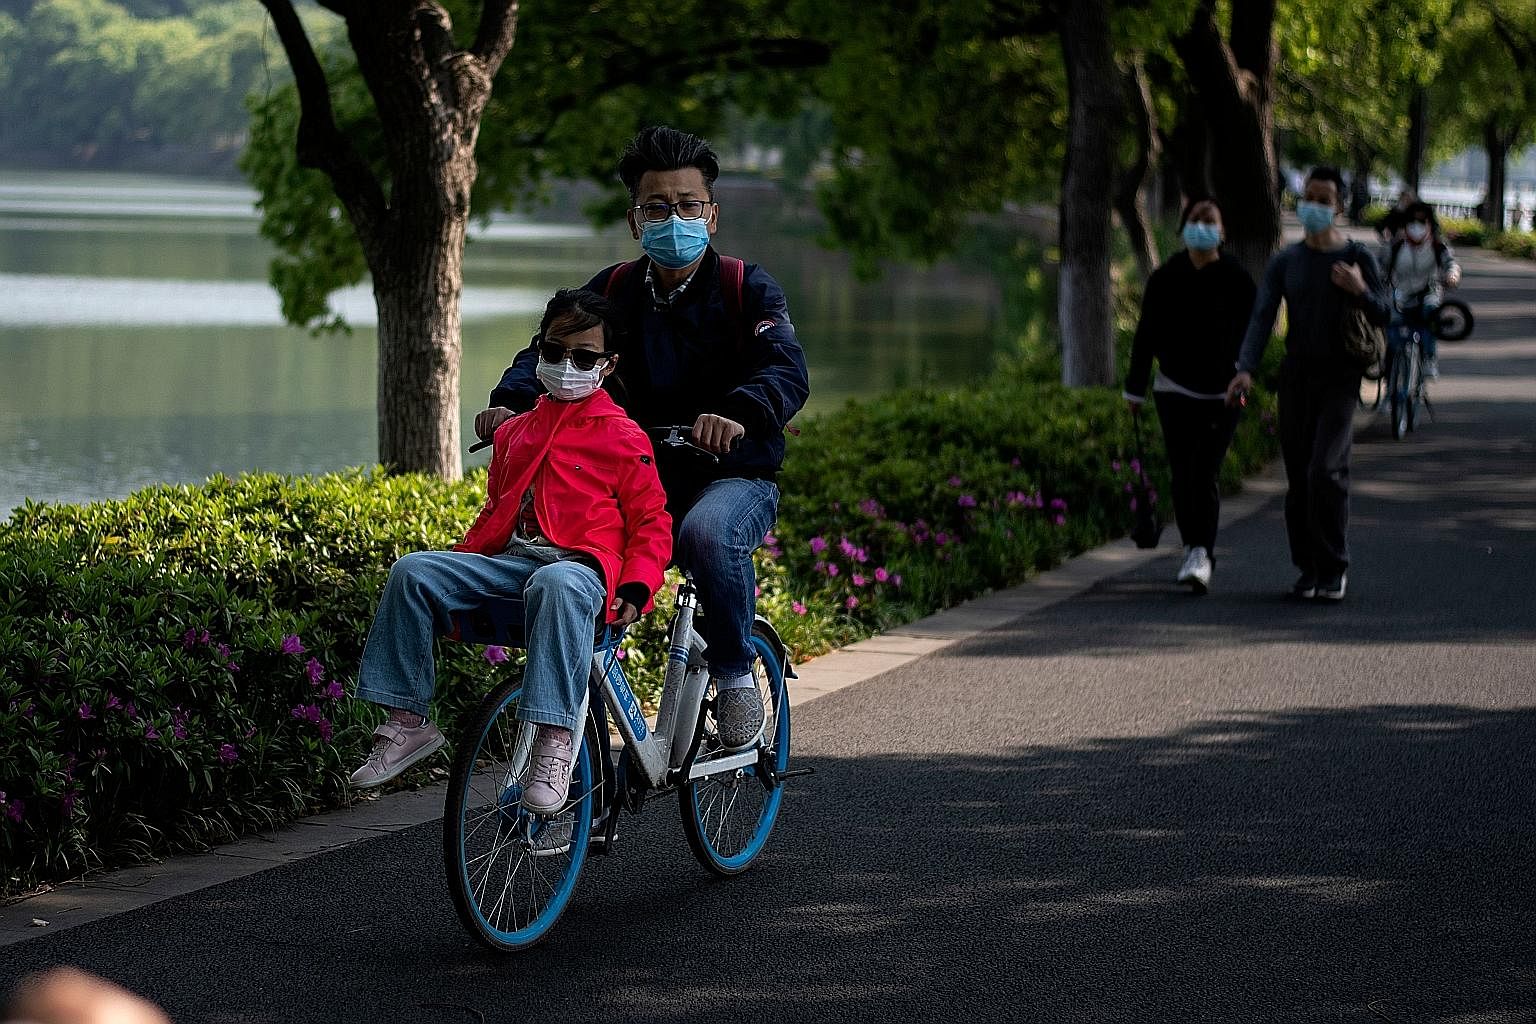 From top: Cyclists and walkers in Wuhan's East Lake Plum Flower Garden on Sunday, after the city's lockdown ended; medical workers outside Jinyintan Hospital last Tuesday; employees in protective gear disinfecting a visitor to the city's Zonsen Medic